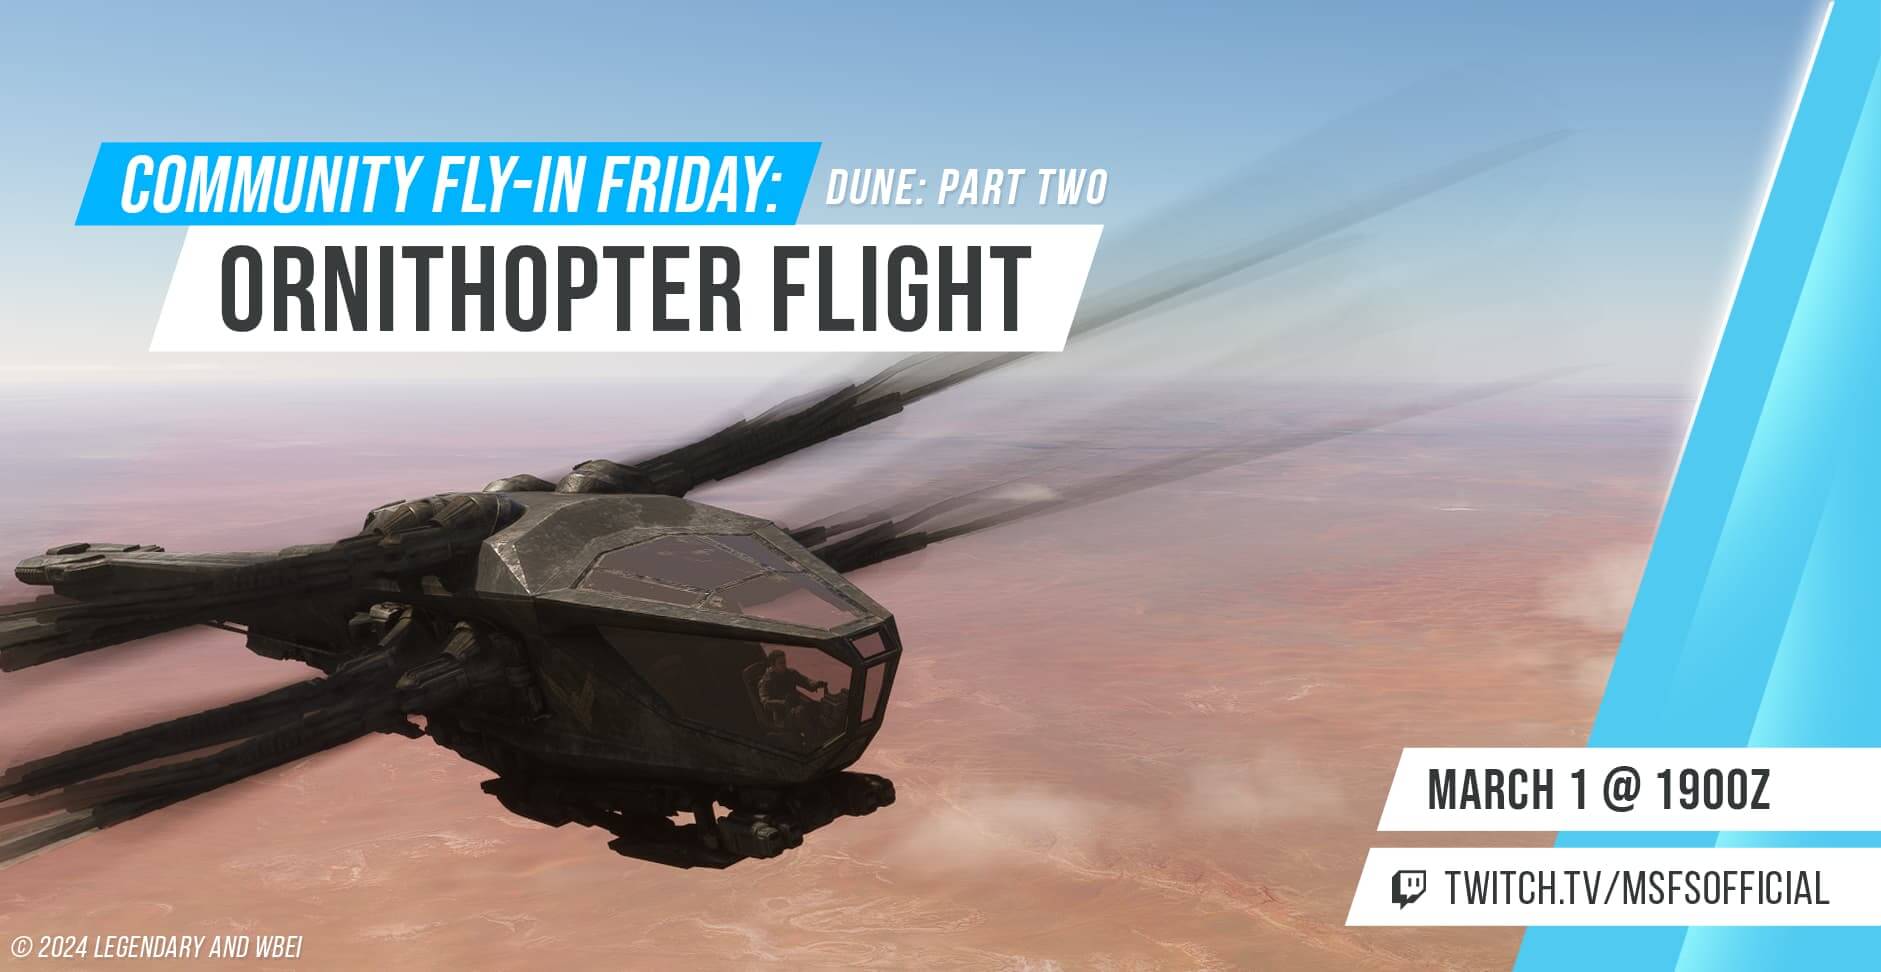 Community Fly-In Friday: Ornithopter Flight. March 1st at 1900 UTC. twitch.tv/msfsofficial